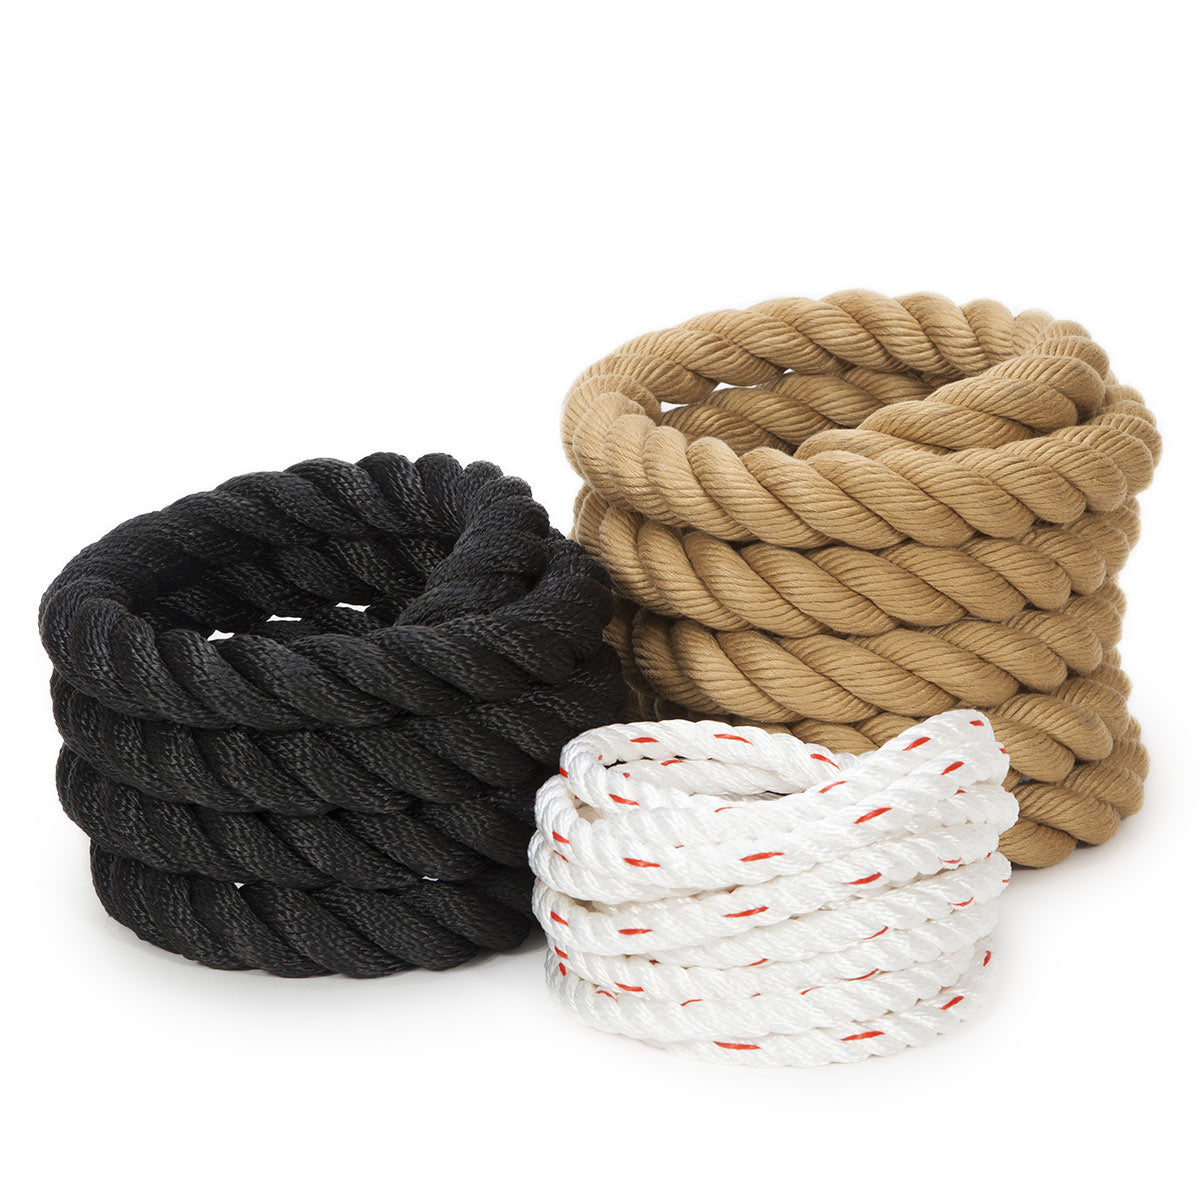 Project Help — Knot & Rope Supply